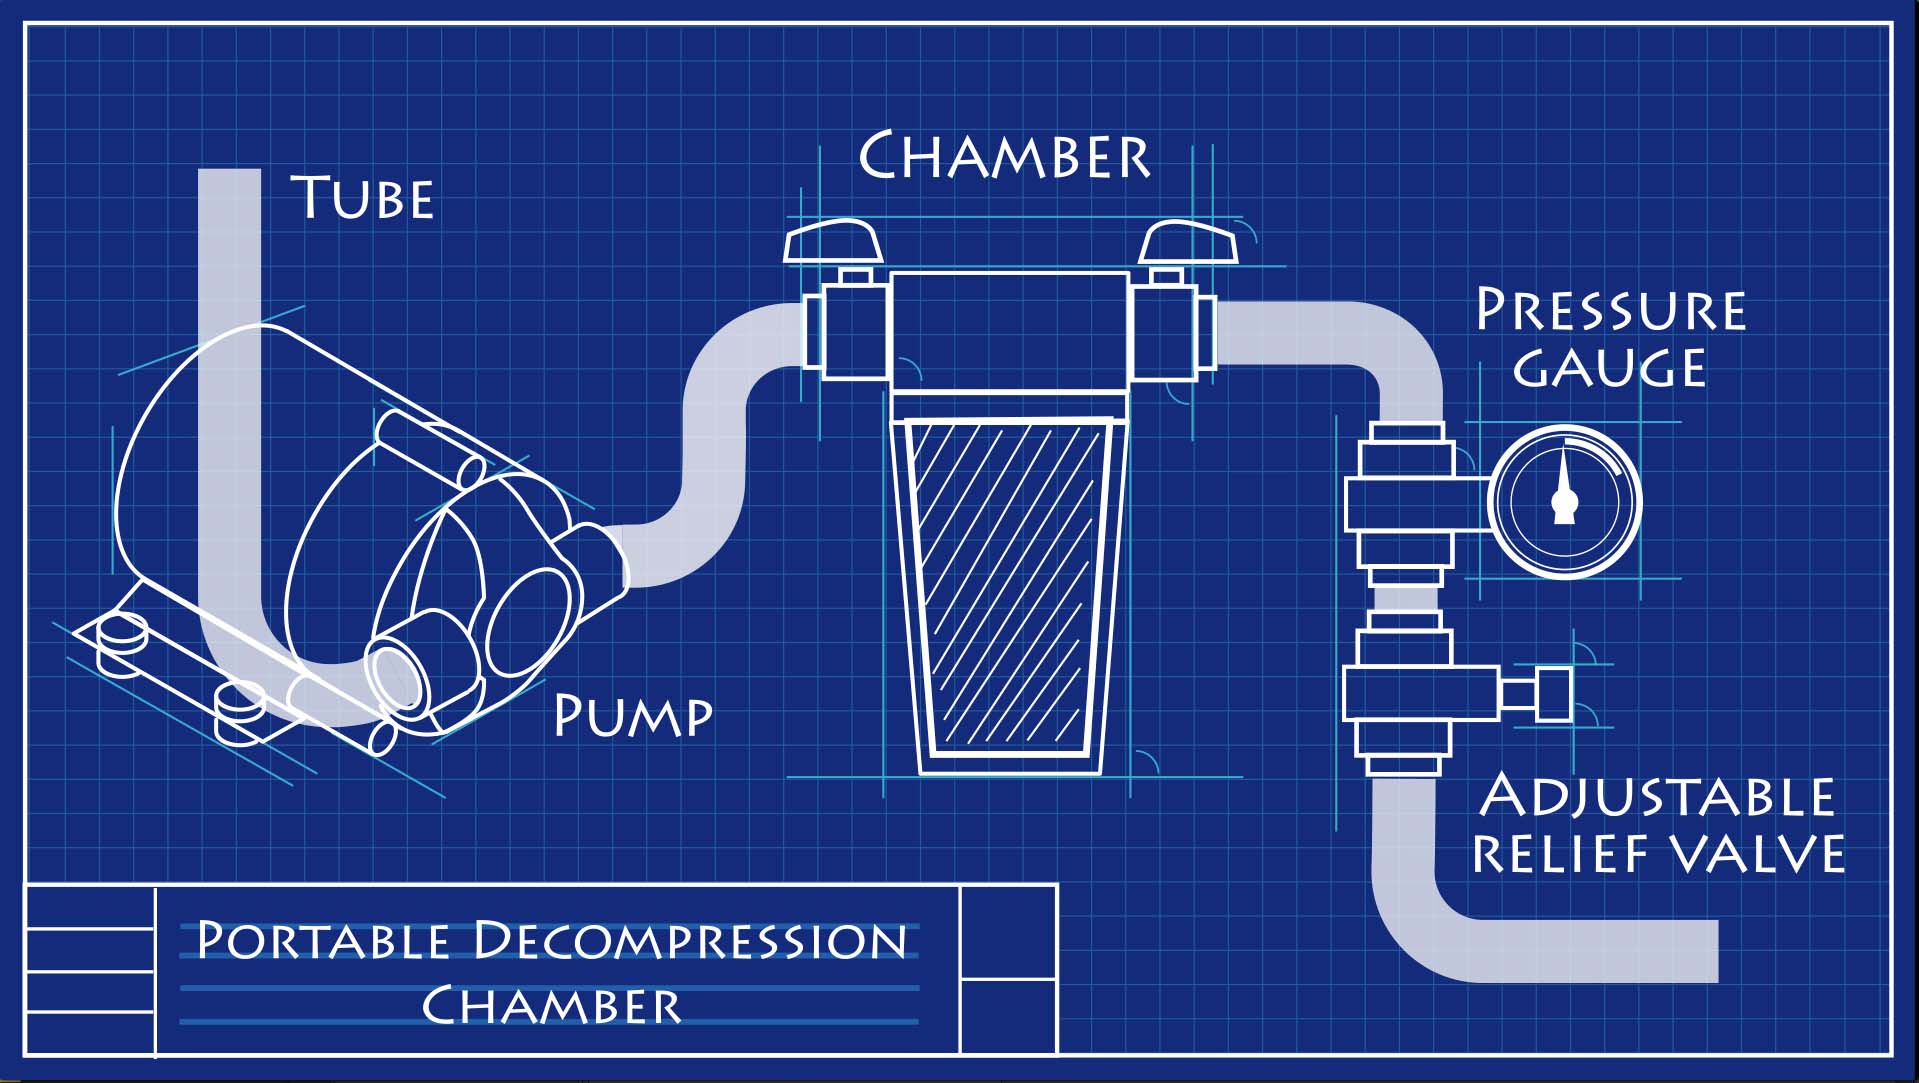 Schematic of decompression chamber